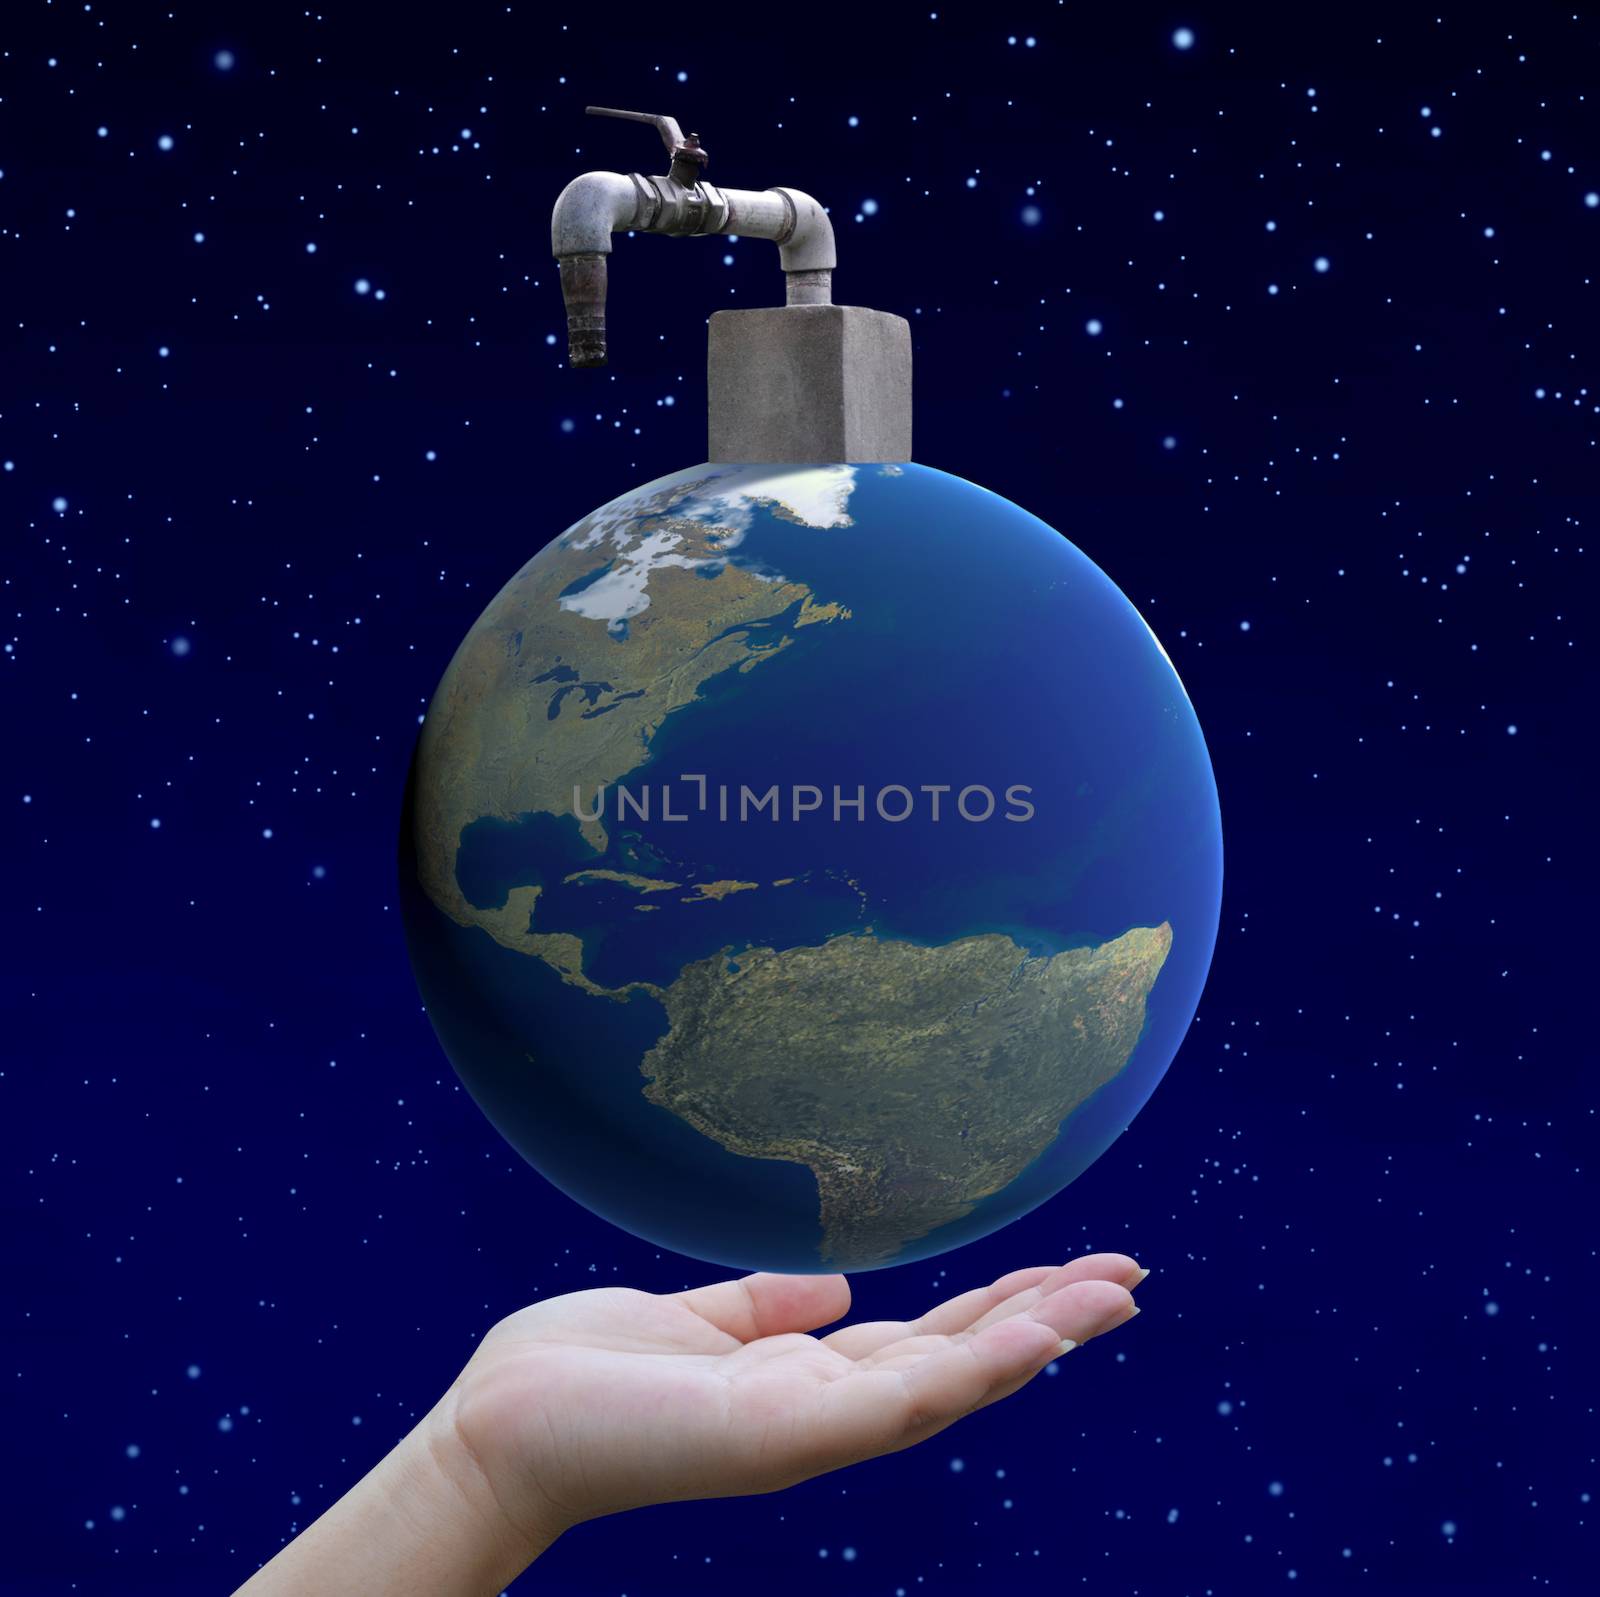 hand holding arid world with faucet, earth globe image provided by NASA